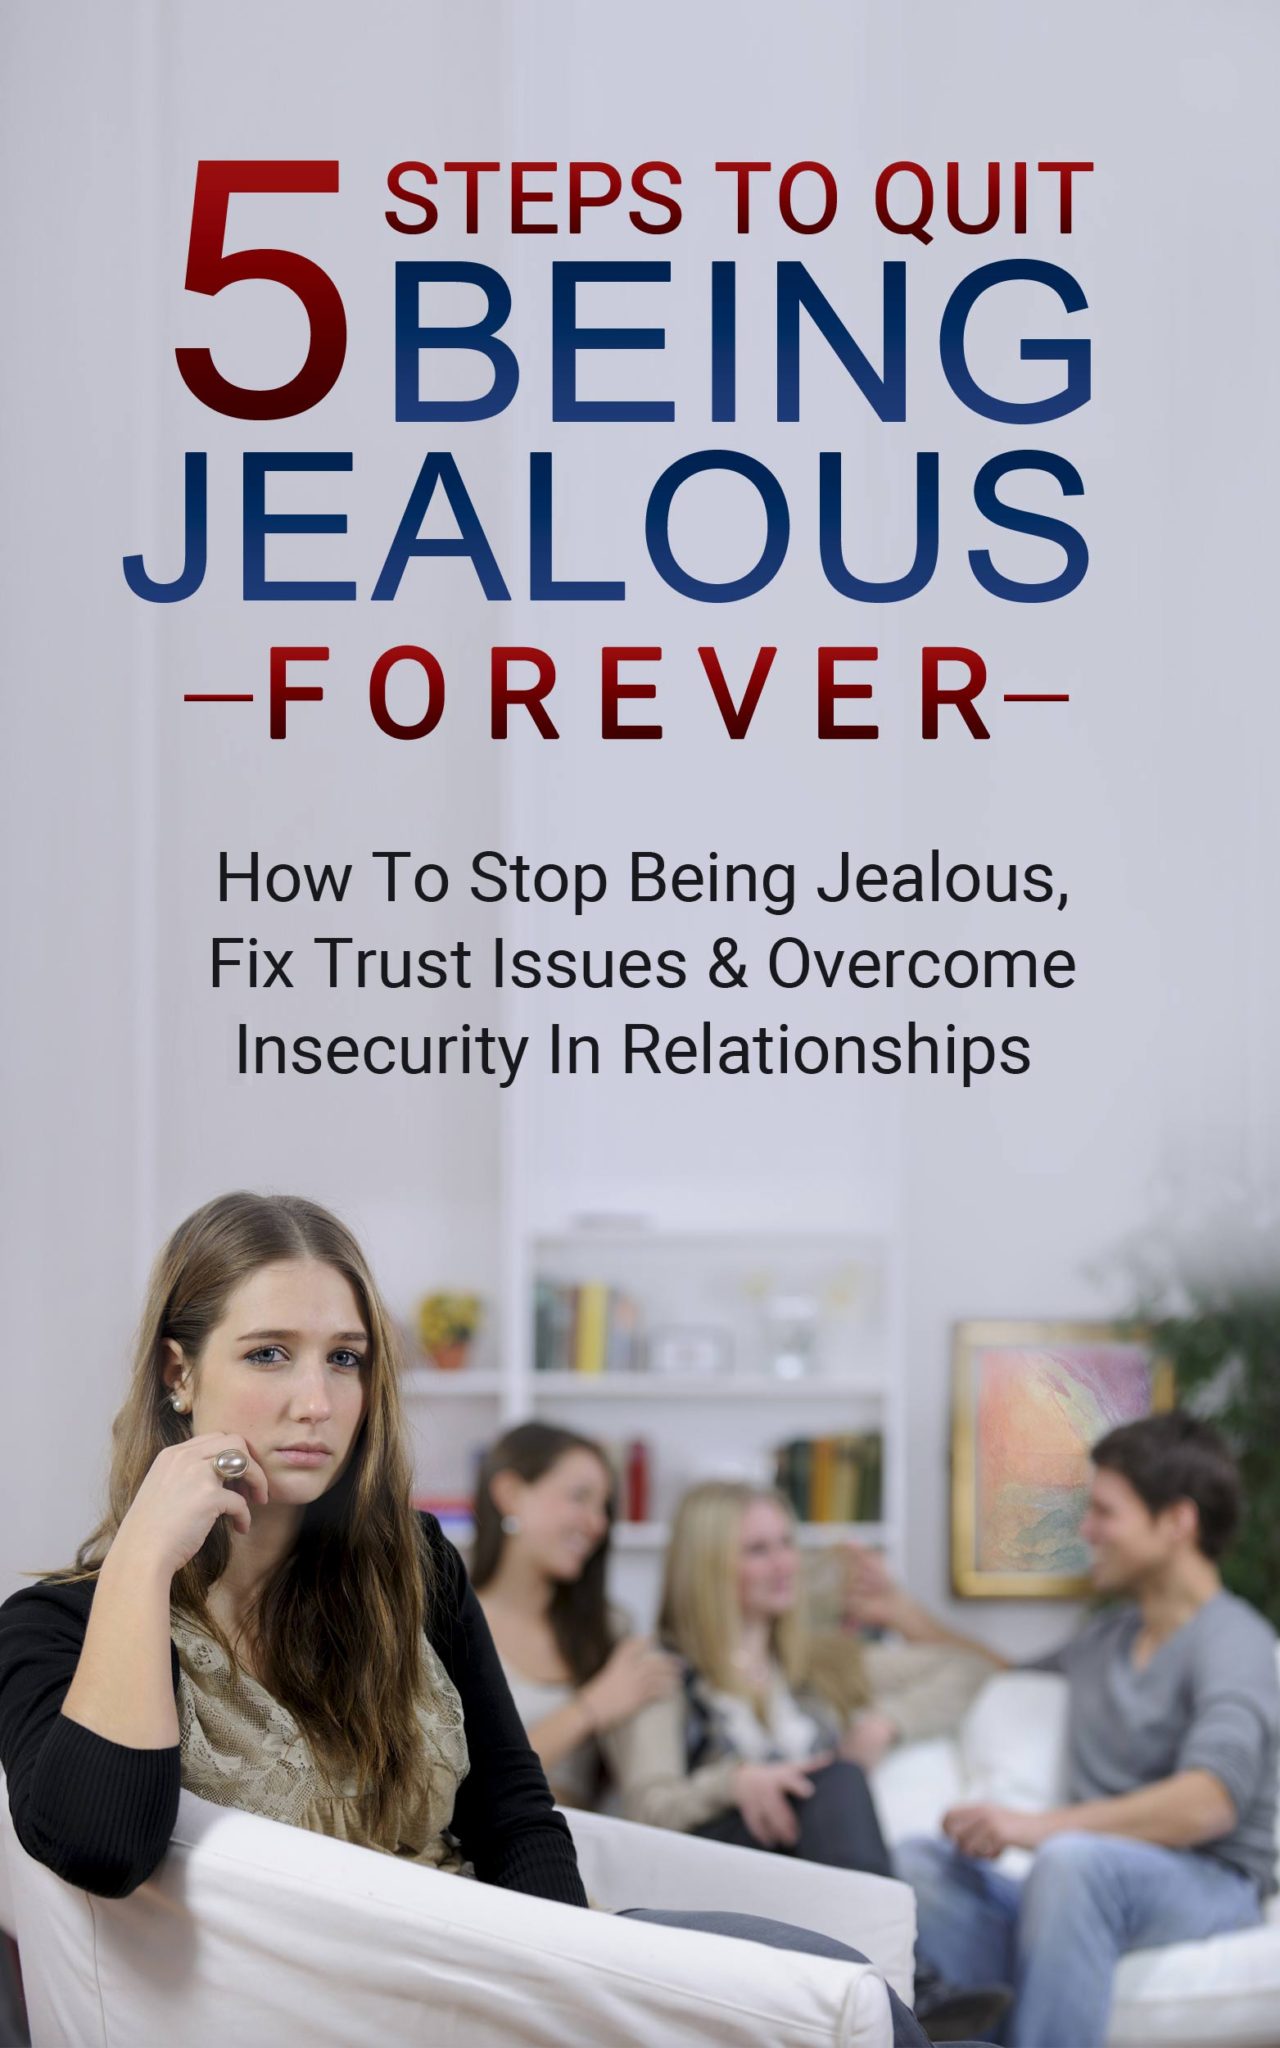 FREE: 5 Steps To Quit Being Jealous Forever: How To Stop Being Jealous, Fix Trust Issues & Overcome Insecurity In Relationships by Jamie Braun